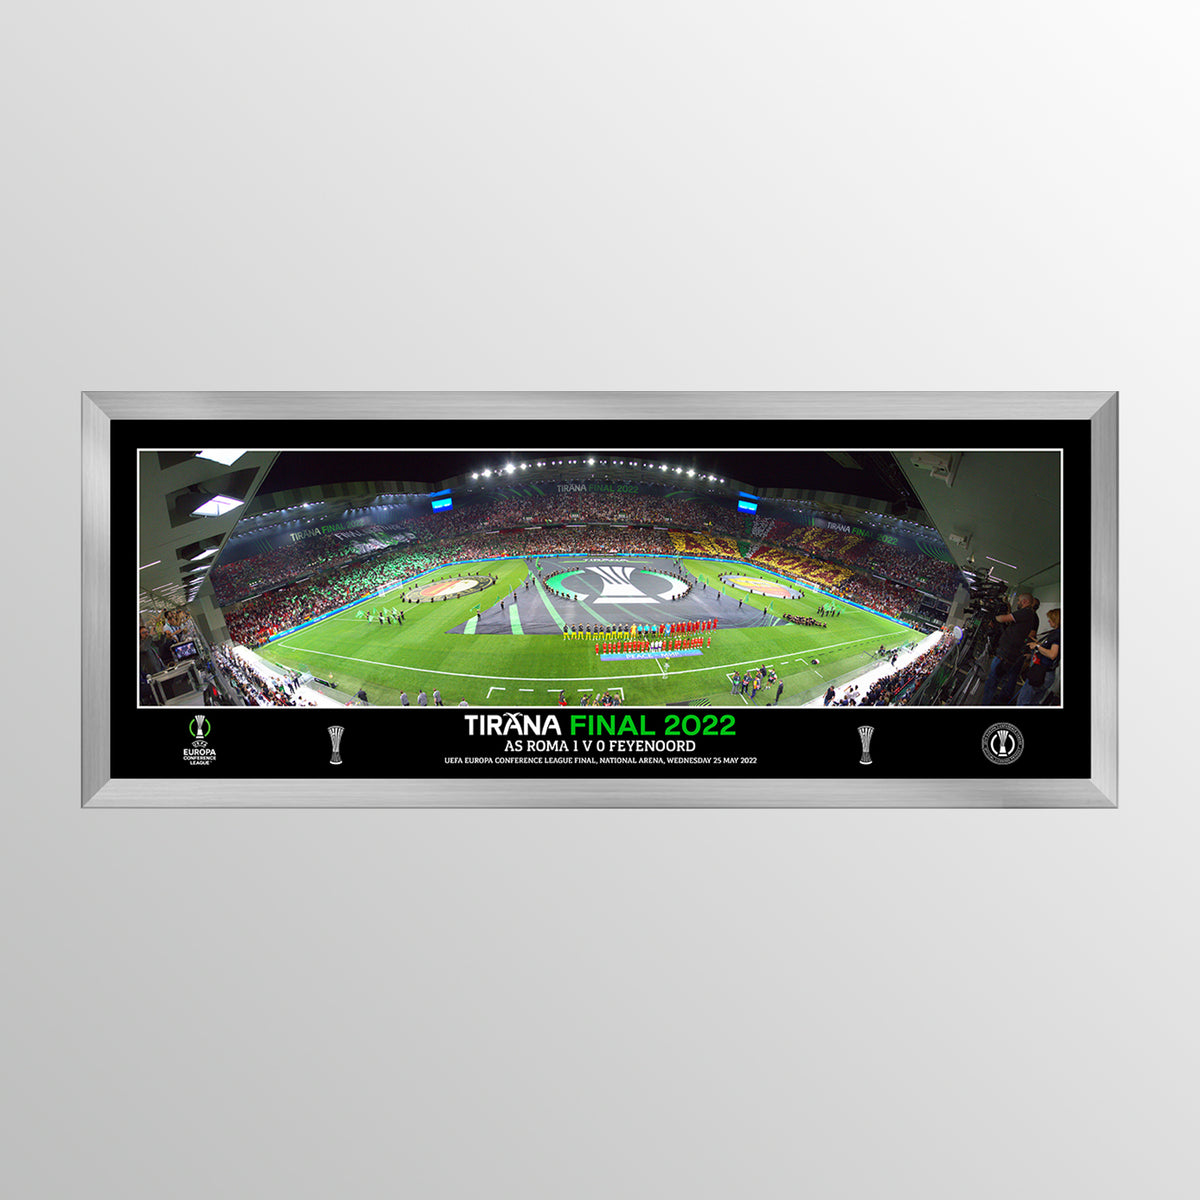 Tirana Panoramic Line Up Framed Print 30”x11&quot; - Conference League Final UEFA Club Competitions Online Store